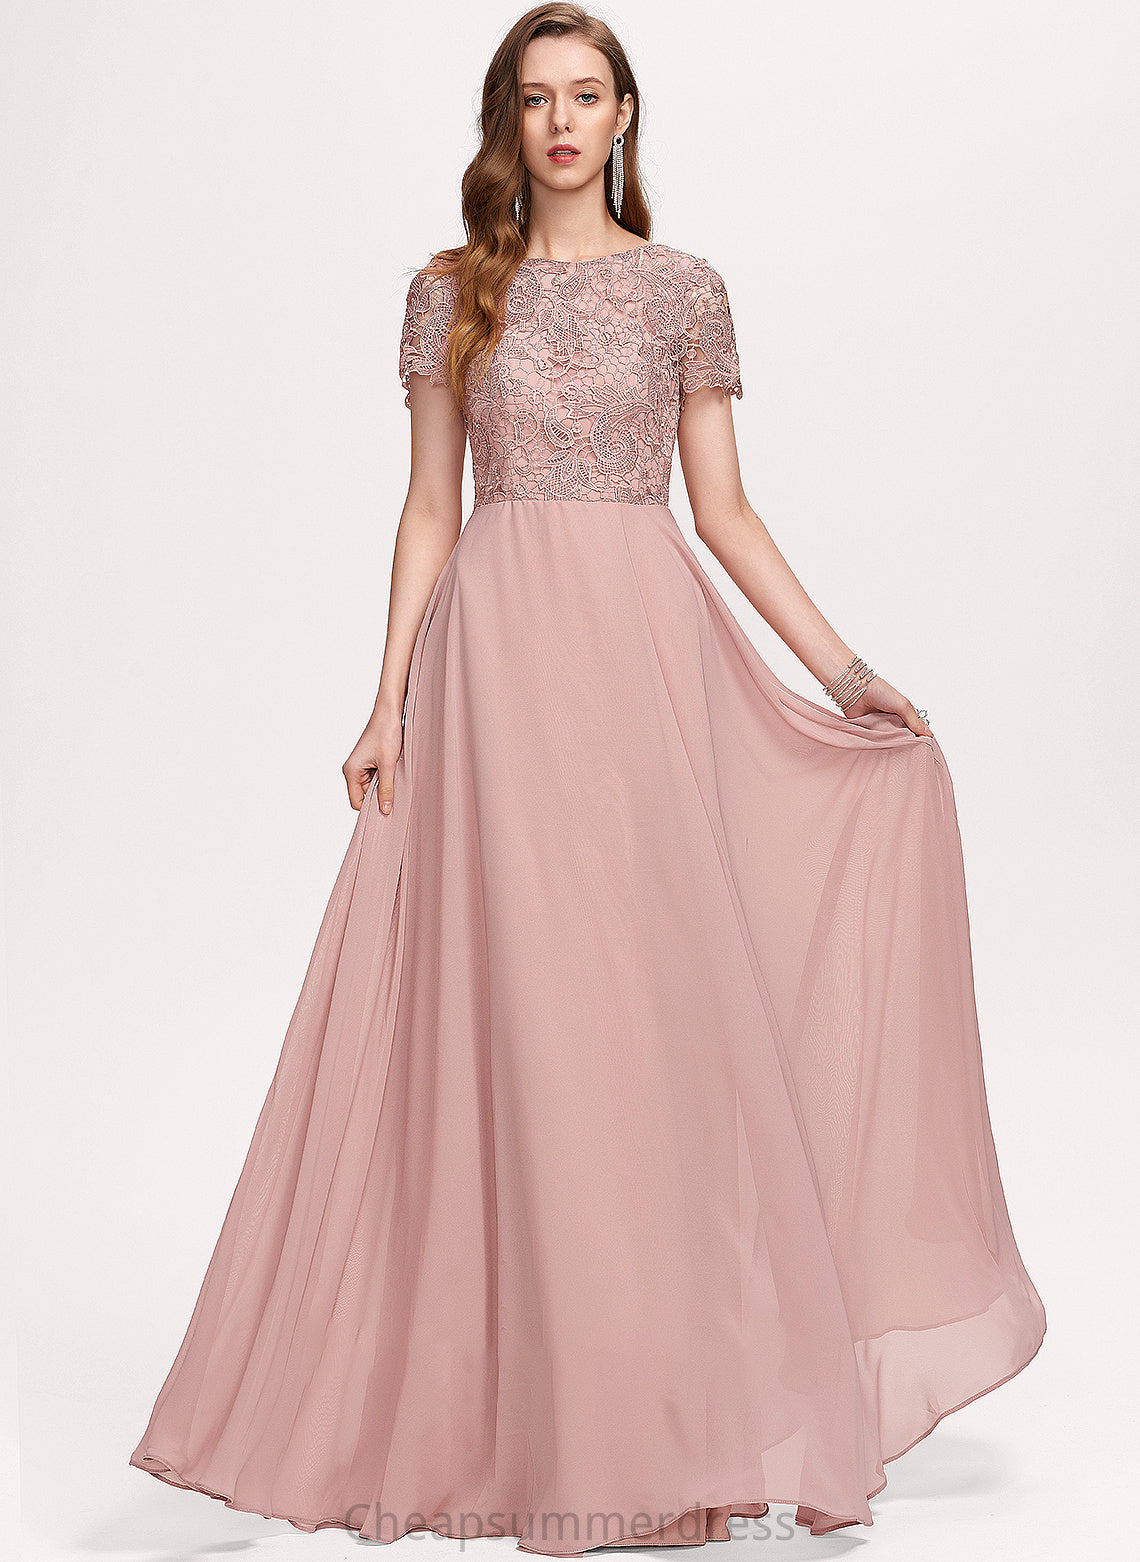 Neck Sequins Chiffon Prom Dresses Scoop Floor-Length With Tamara A-Line